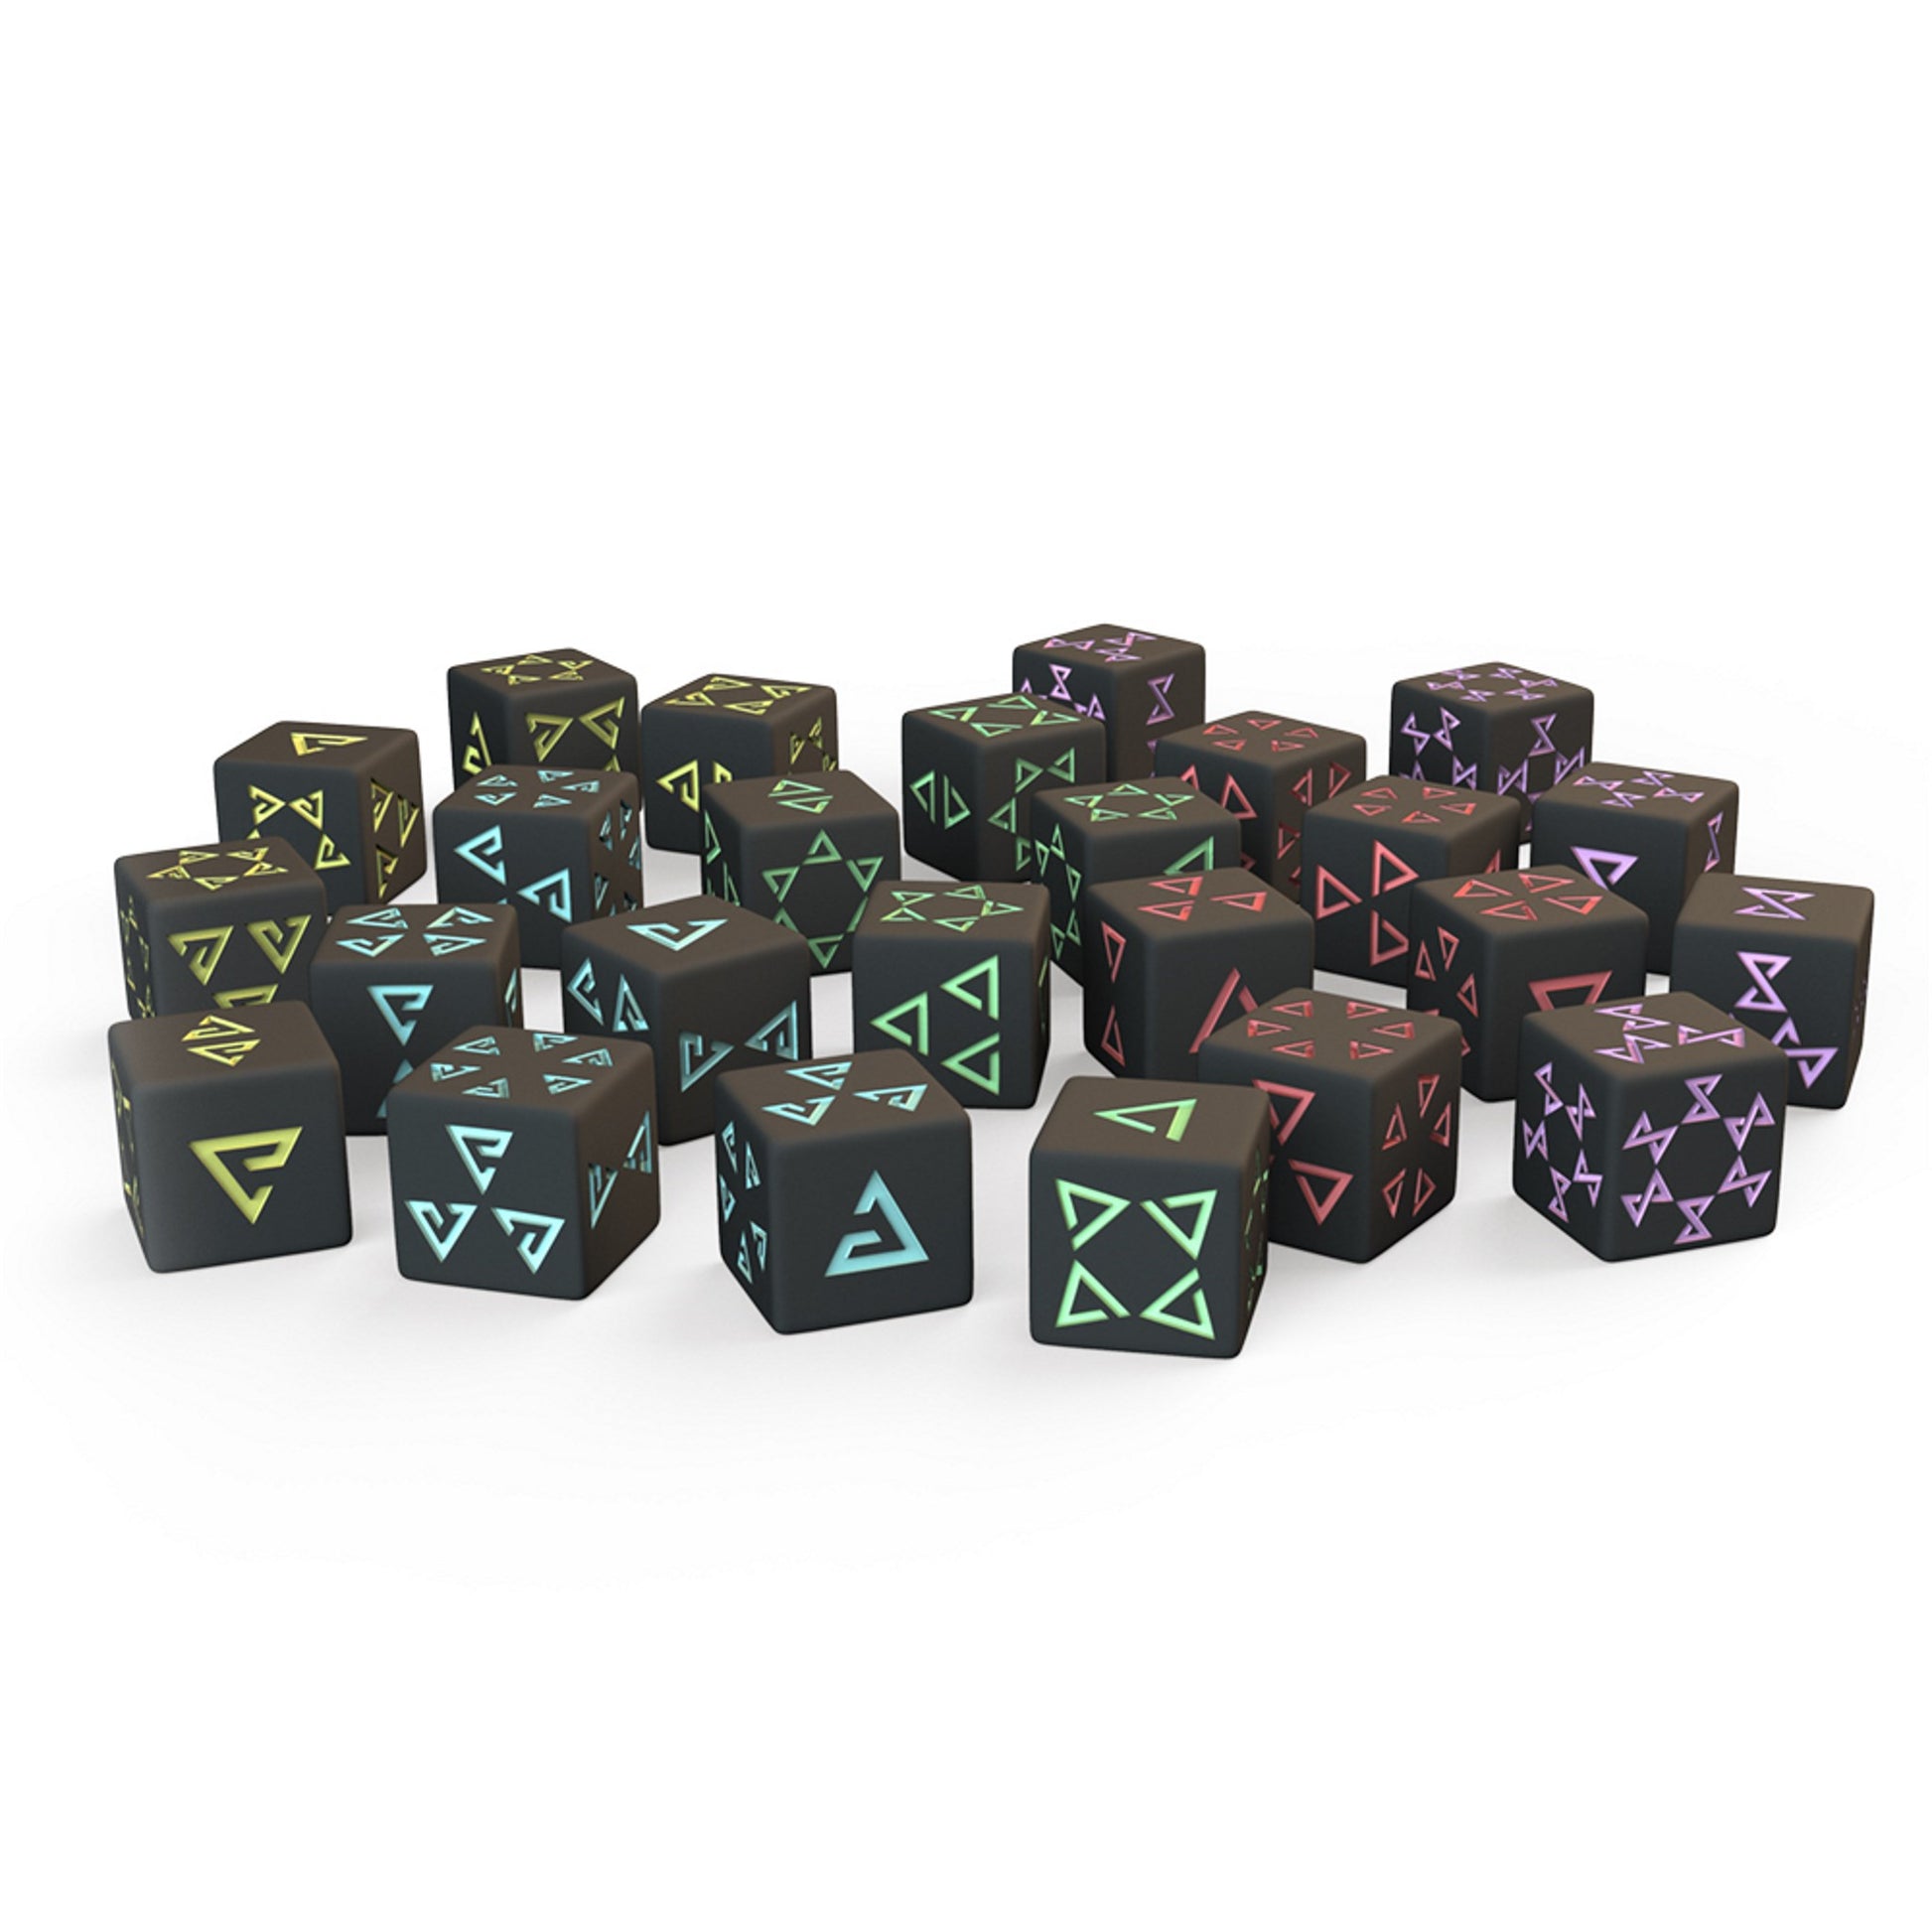    Witcher Old world dice set